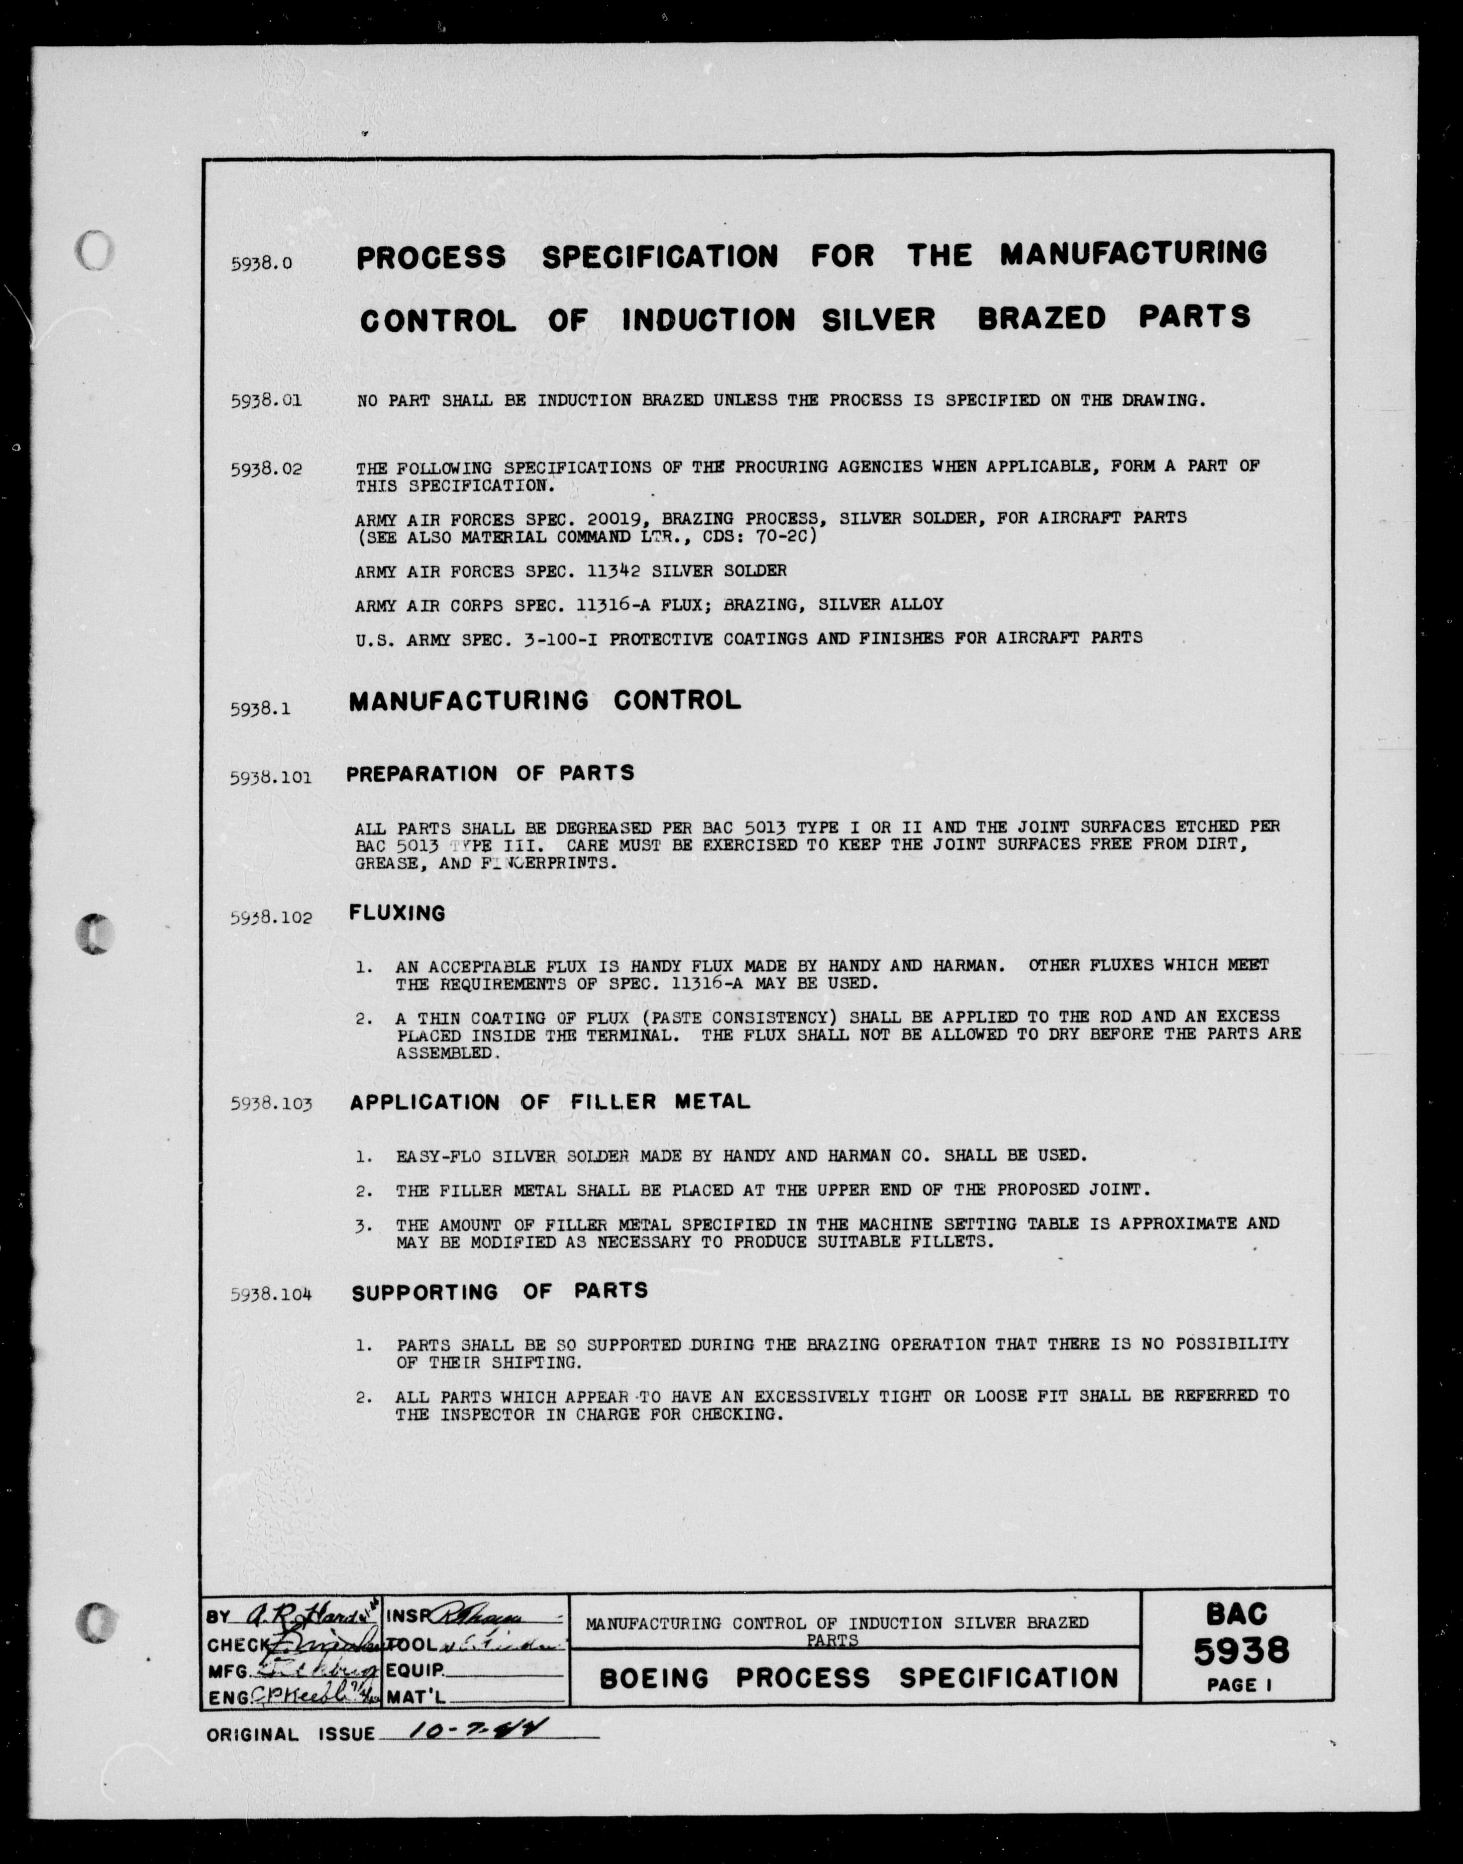 Sample page 1 from AirCorps Library document: Manufacturing Control of Induction Silver Brazed Parts